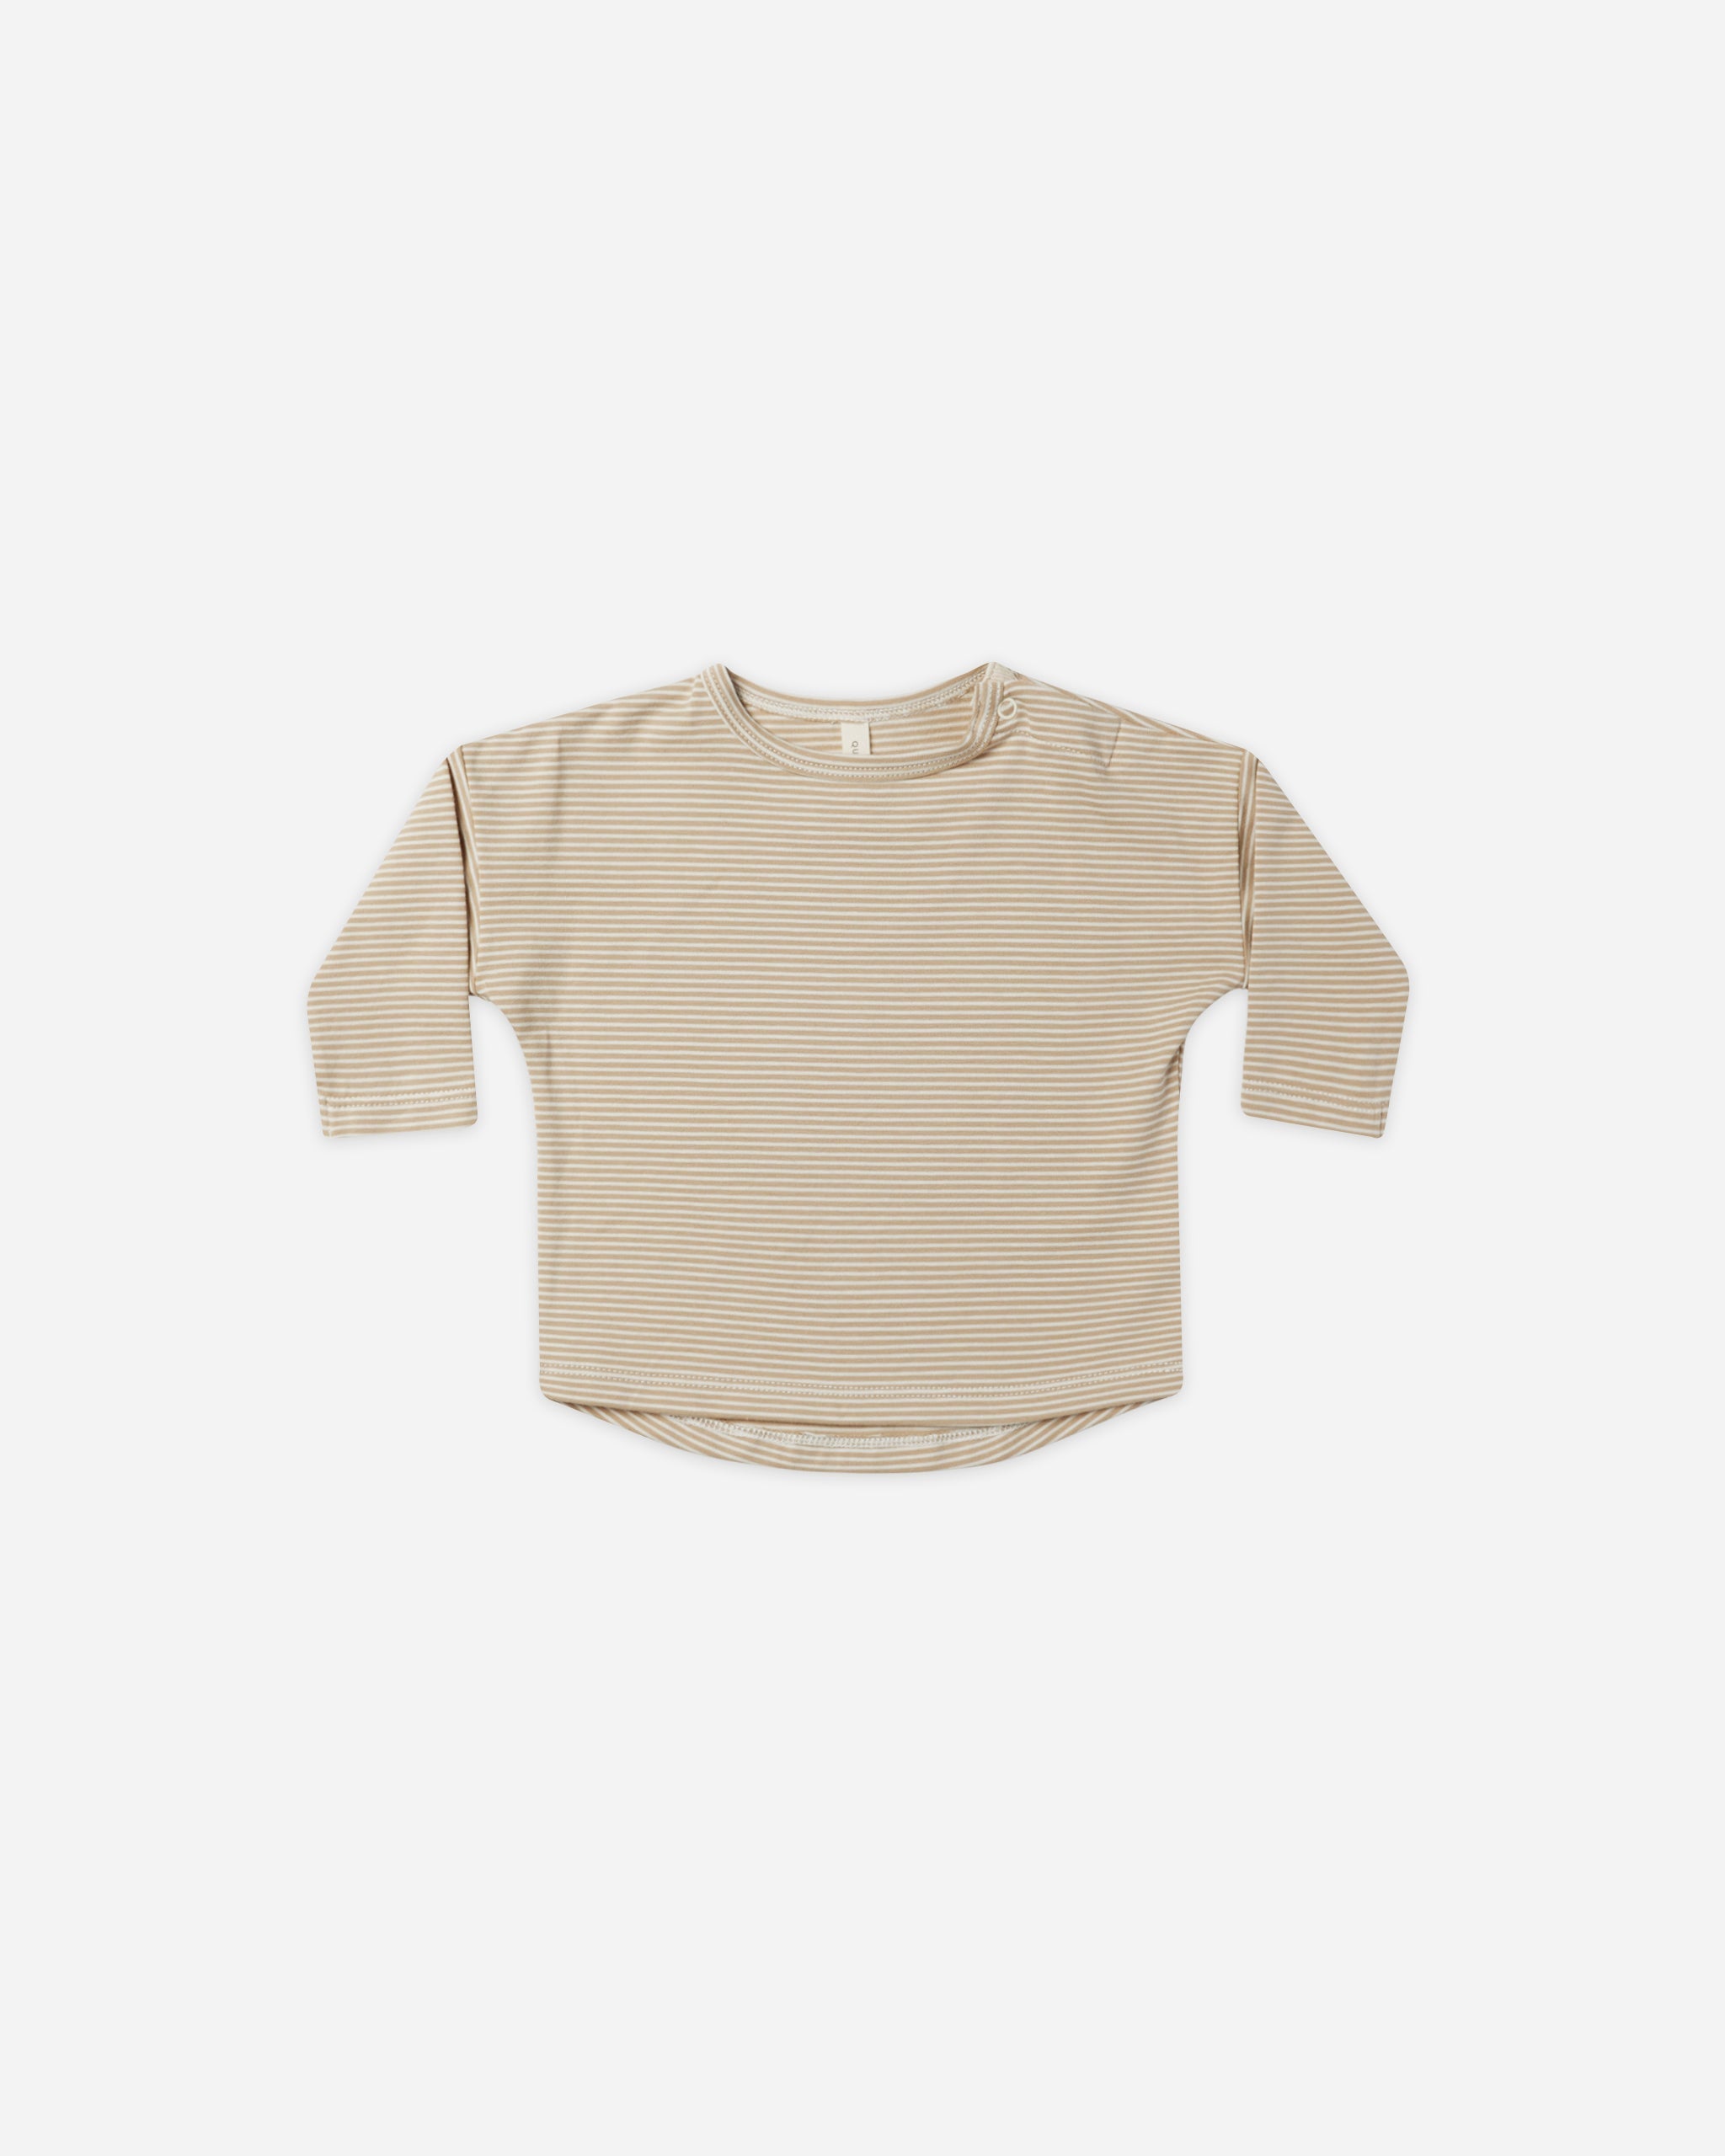 Long Sleeve Tee || Latte Micro Stripe - Rylee + Cru | Kids Clothes | Trendy Baby Clothes | Modern Infant Outfits |